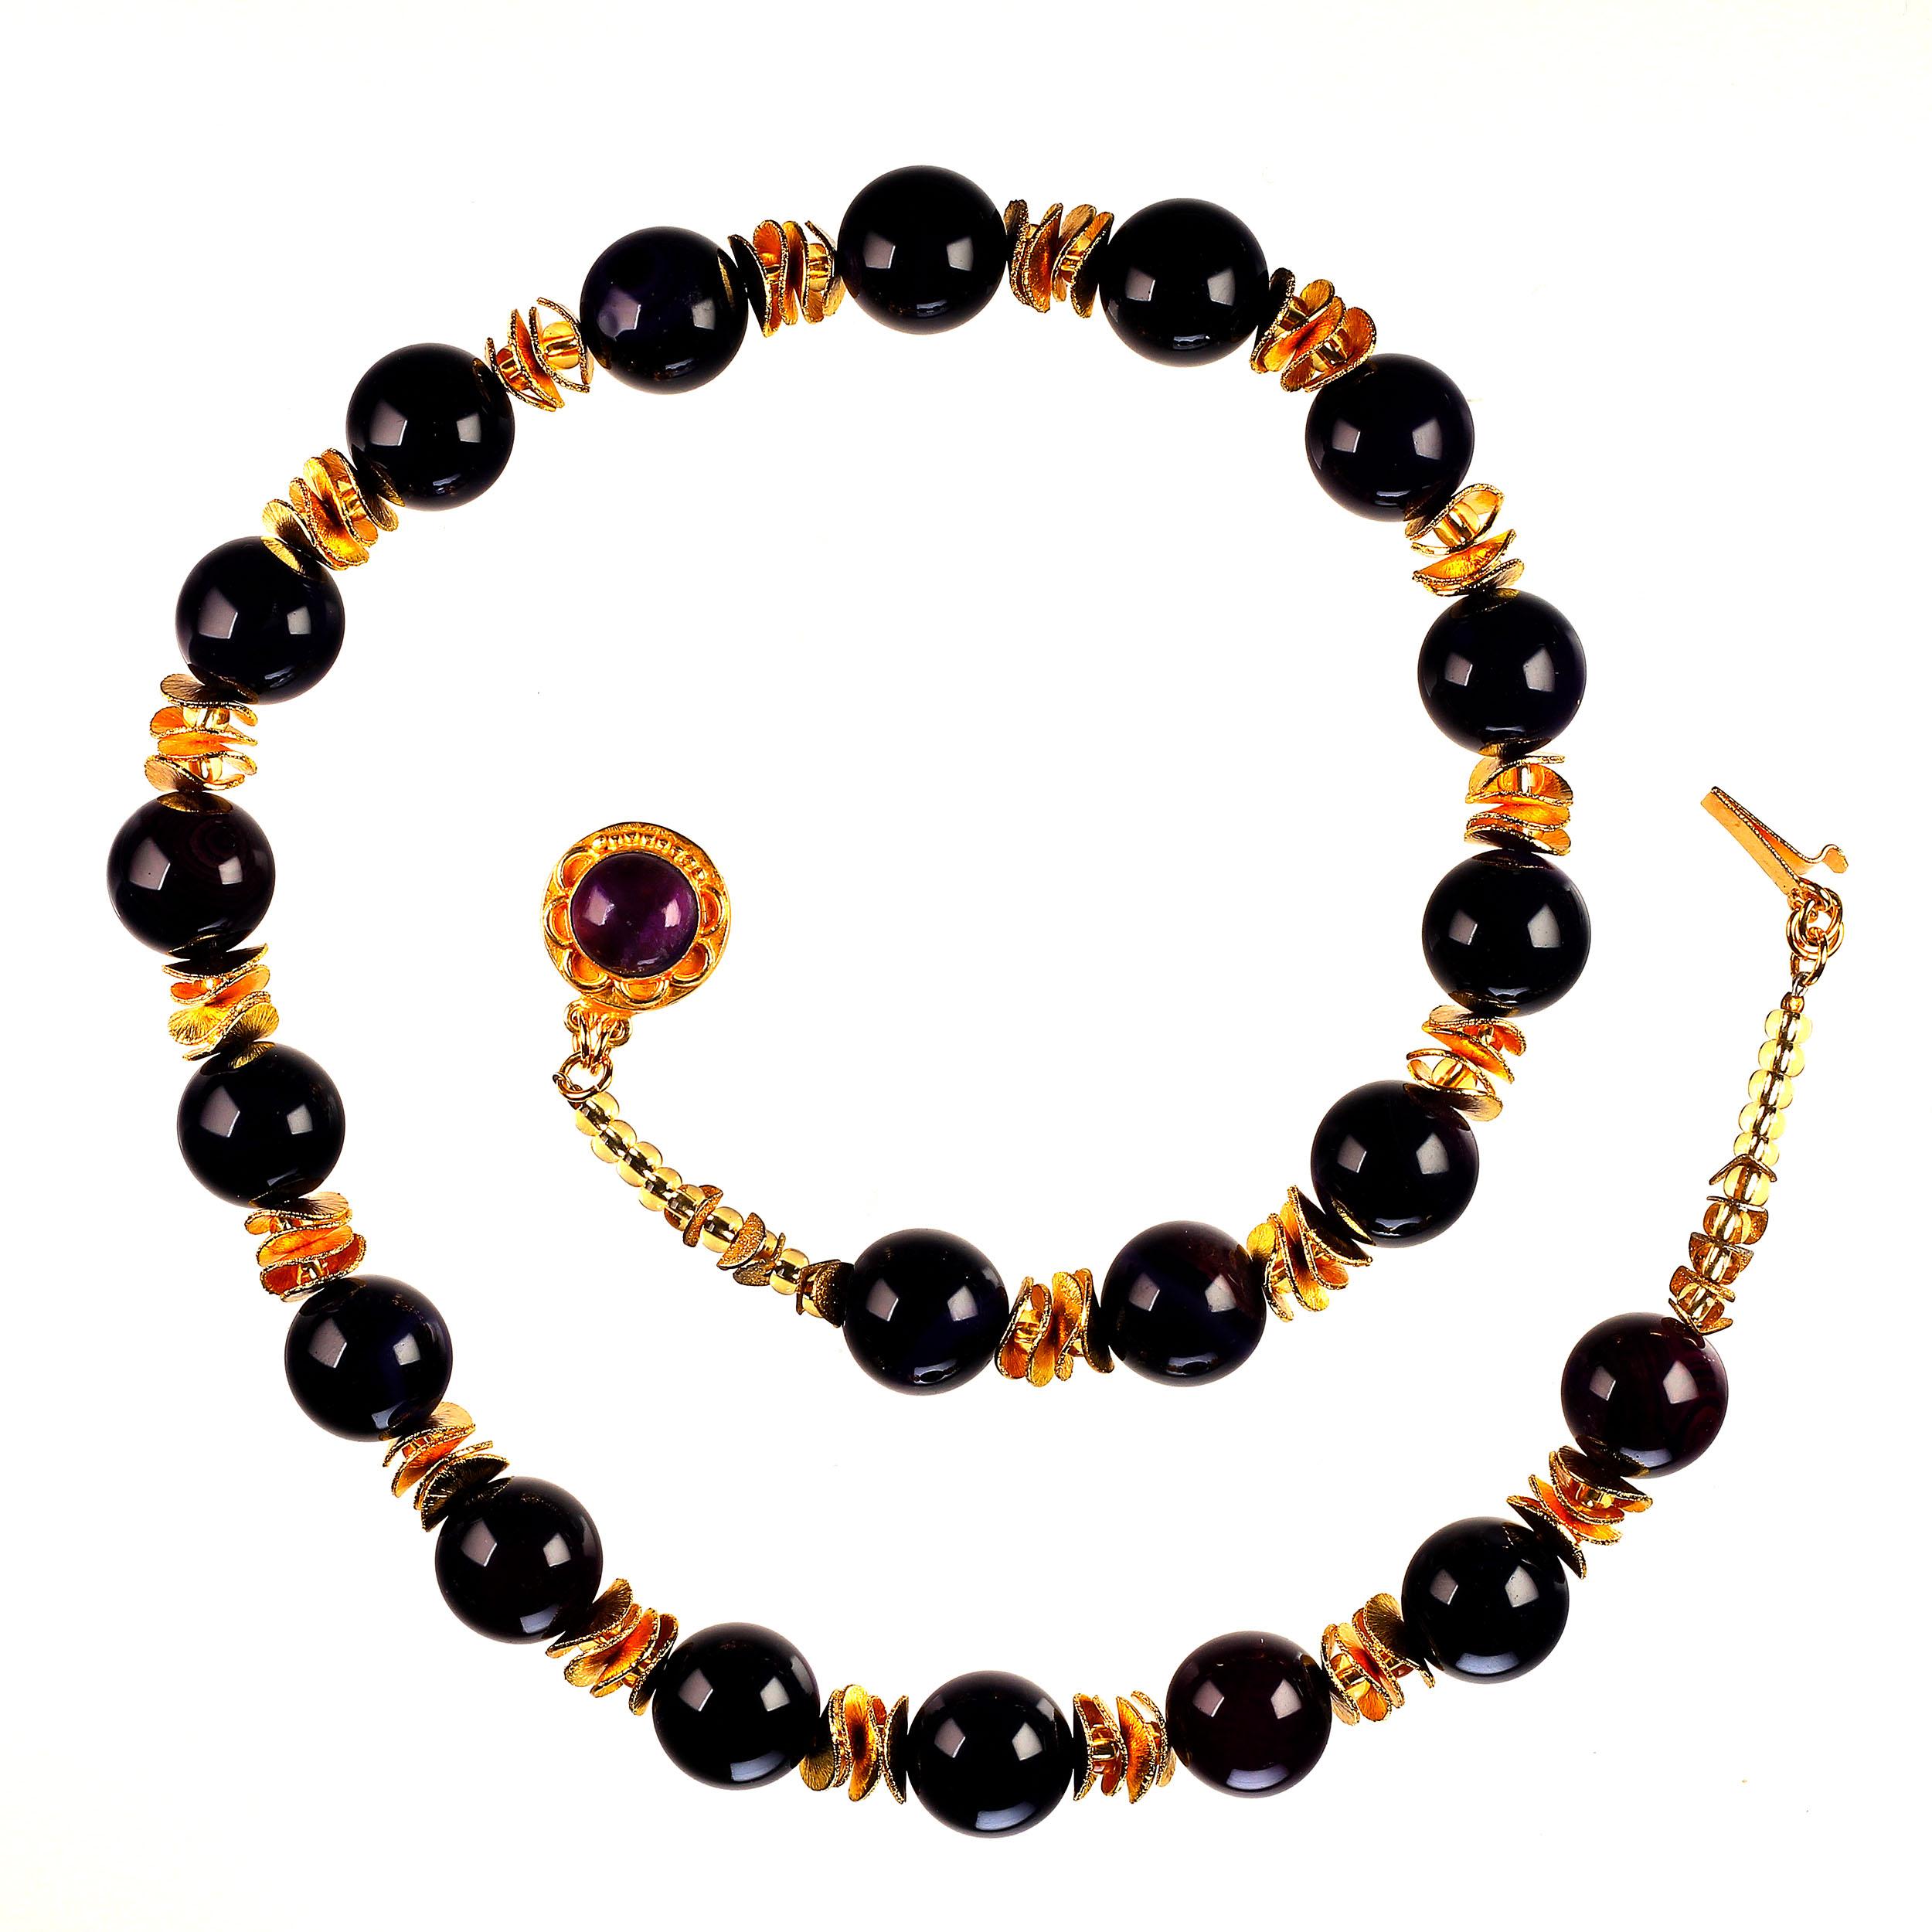 Artisan AJD 23 Inch Necklace of Polished Amethyst with Gold Accents February Birthstone For Sale